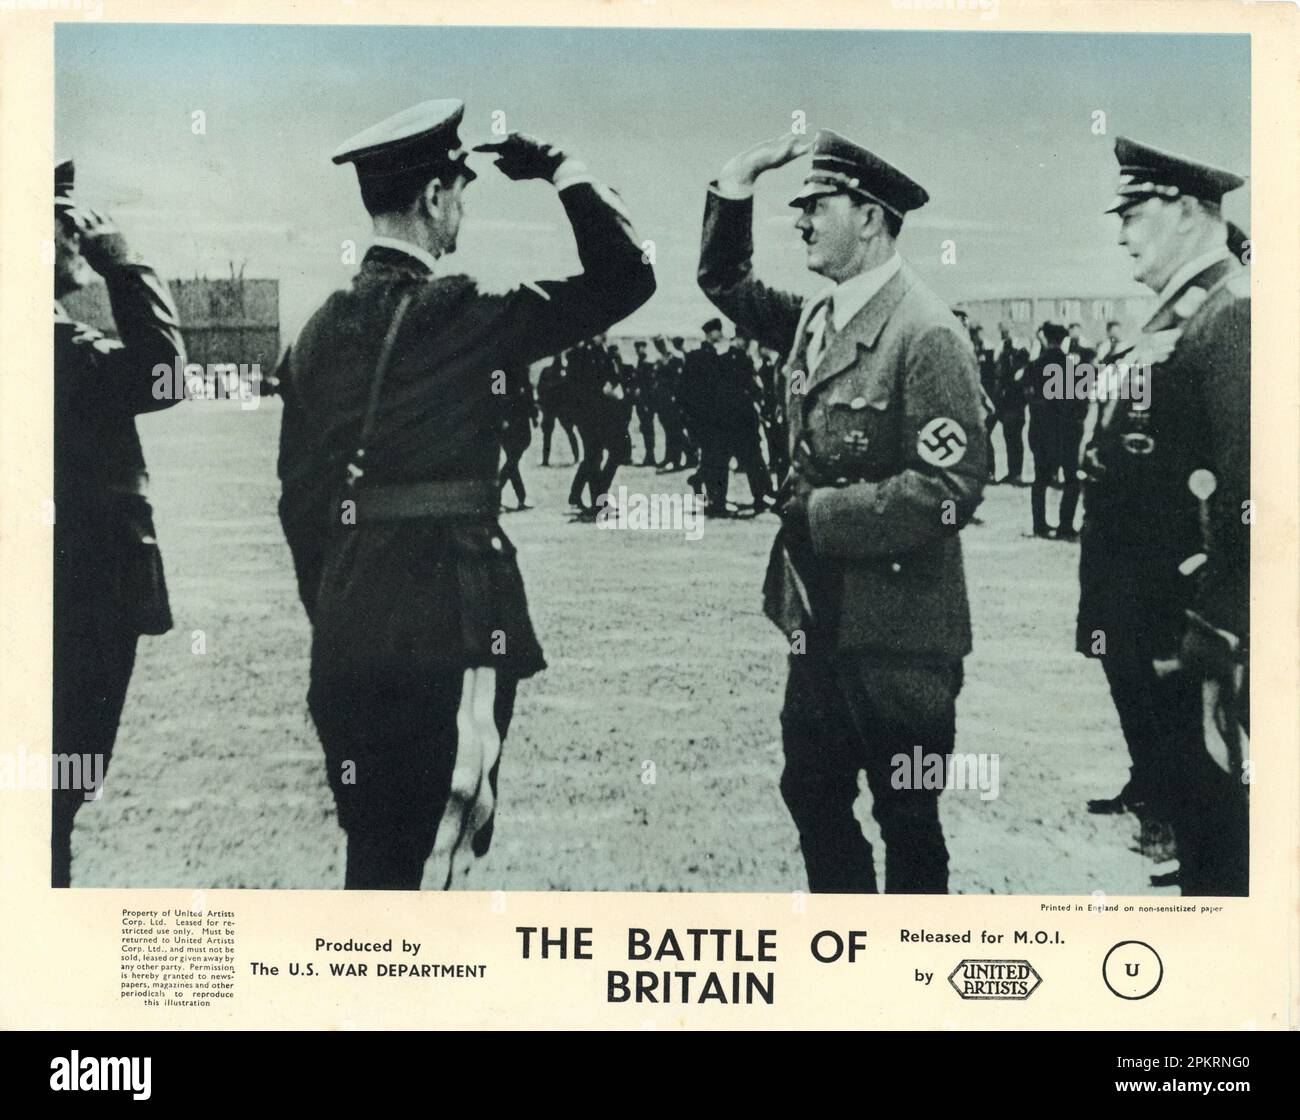 ADOLF HITLER and HERMANN GORING / GOERING in Propaganda Documentary in the WHY WE FIGHT series THE BATTLE OF BRITAIN 1943 directors FRANK CAPRA and ANTHONY VEILLER writers Julian J. Epstein and Philip G. Epstein narrator Walter Huston producer Frank Capra U.S. War Department/ Ministry of Information (M.O.I.)  / United Artists Stock Photo